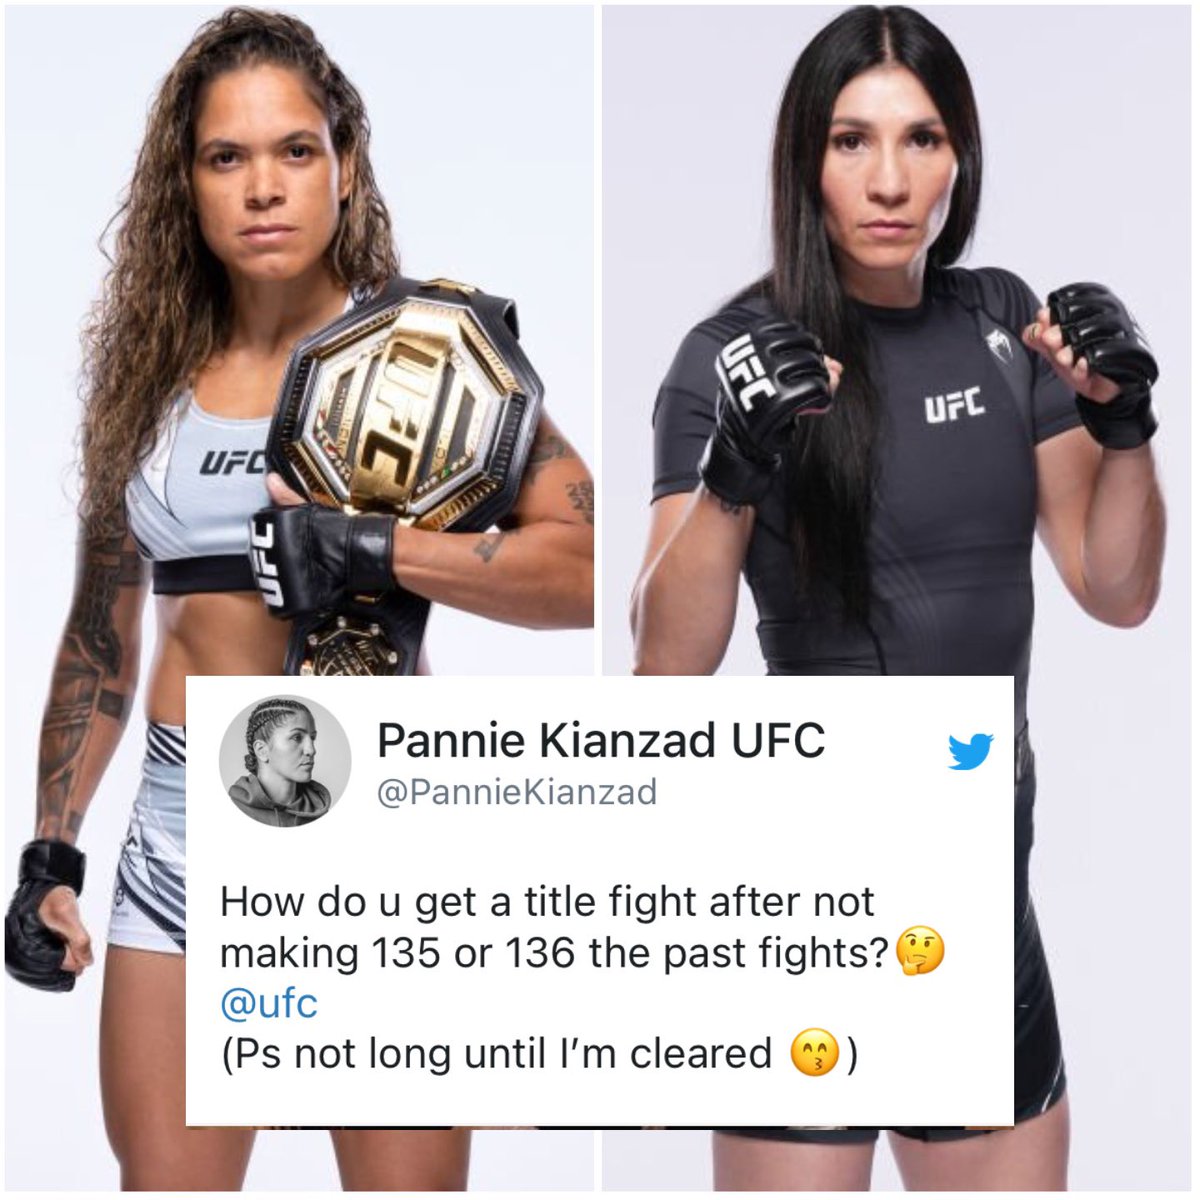 Number-seven ranked bantamweight contender @PannieKianzad hits out at UFC’s decision to offer Irene Aldana the title shot against Amanda Nunes.

What are your opinions? Sound off below! #UFC #MMA https://t.co/ve4fXHx4Sx